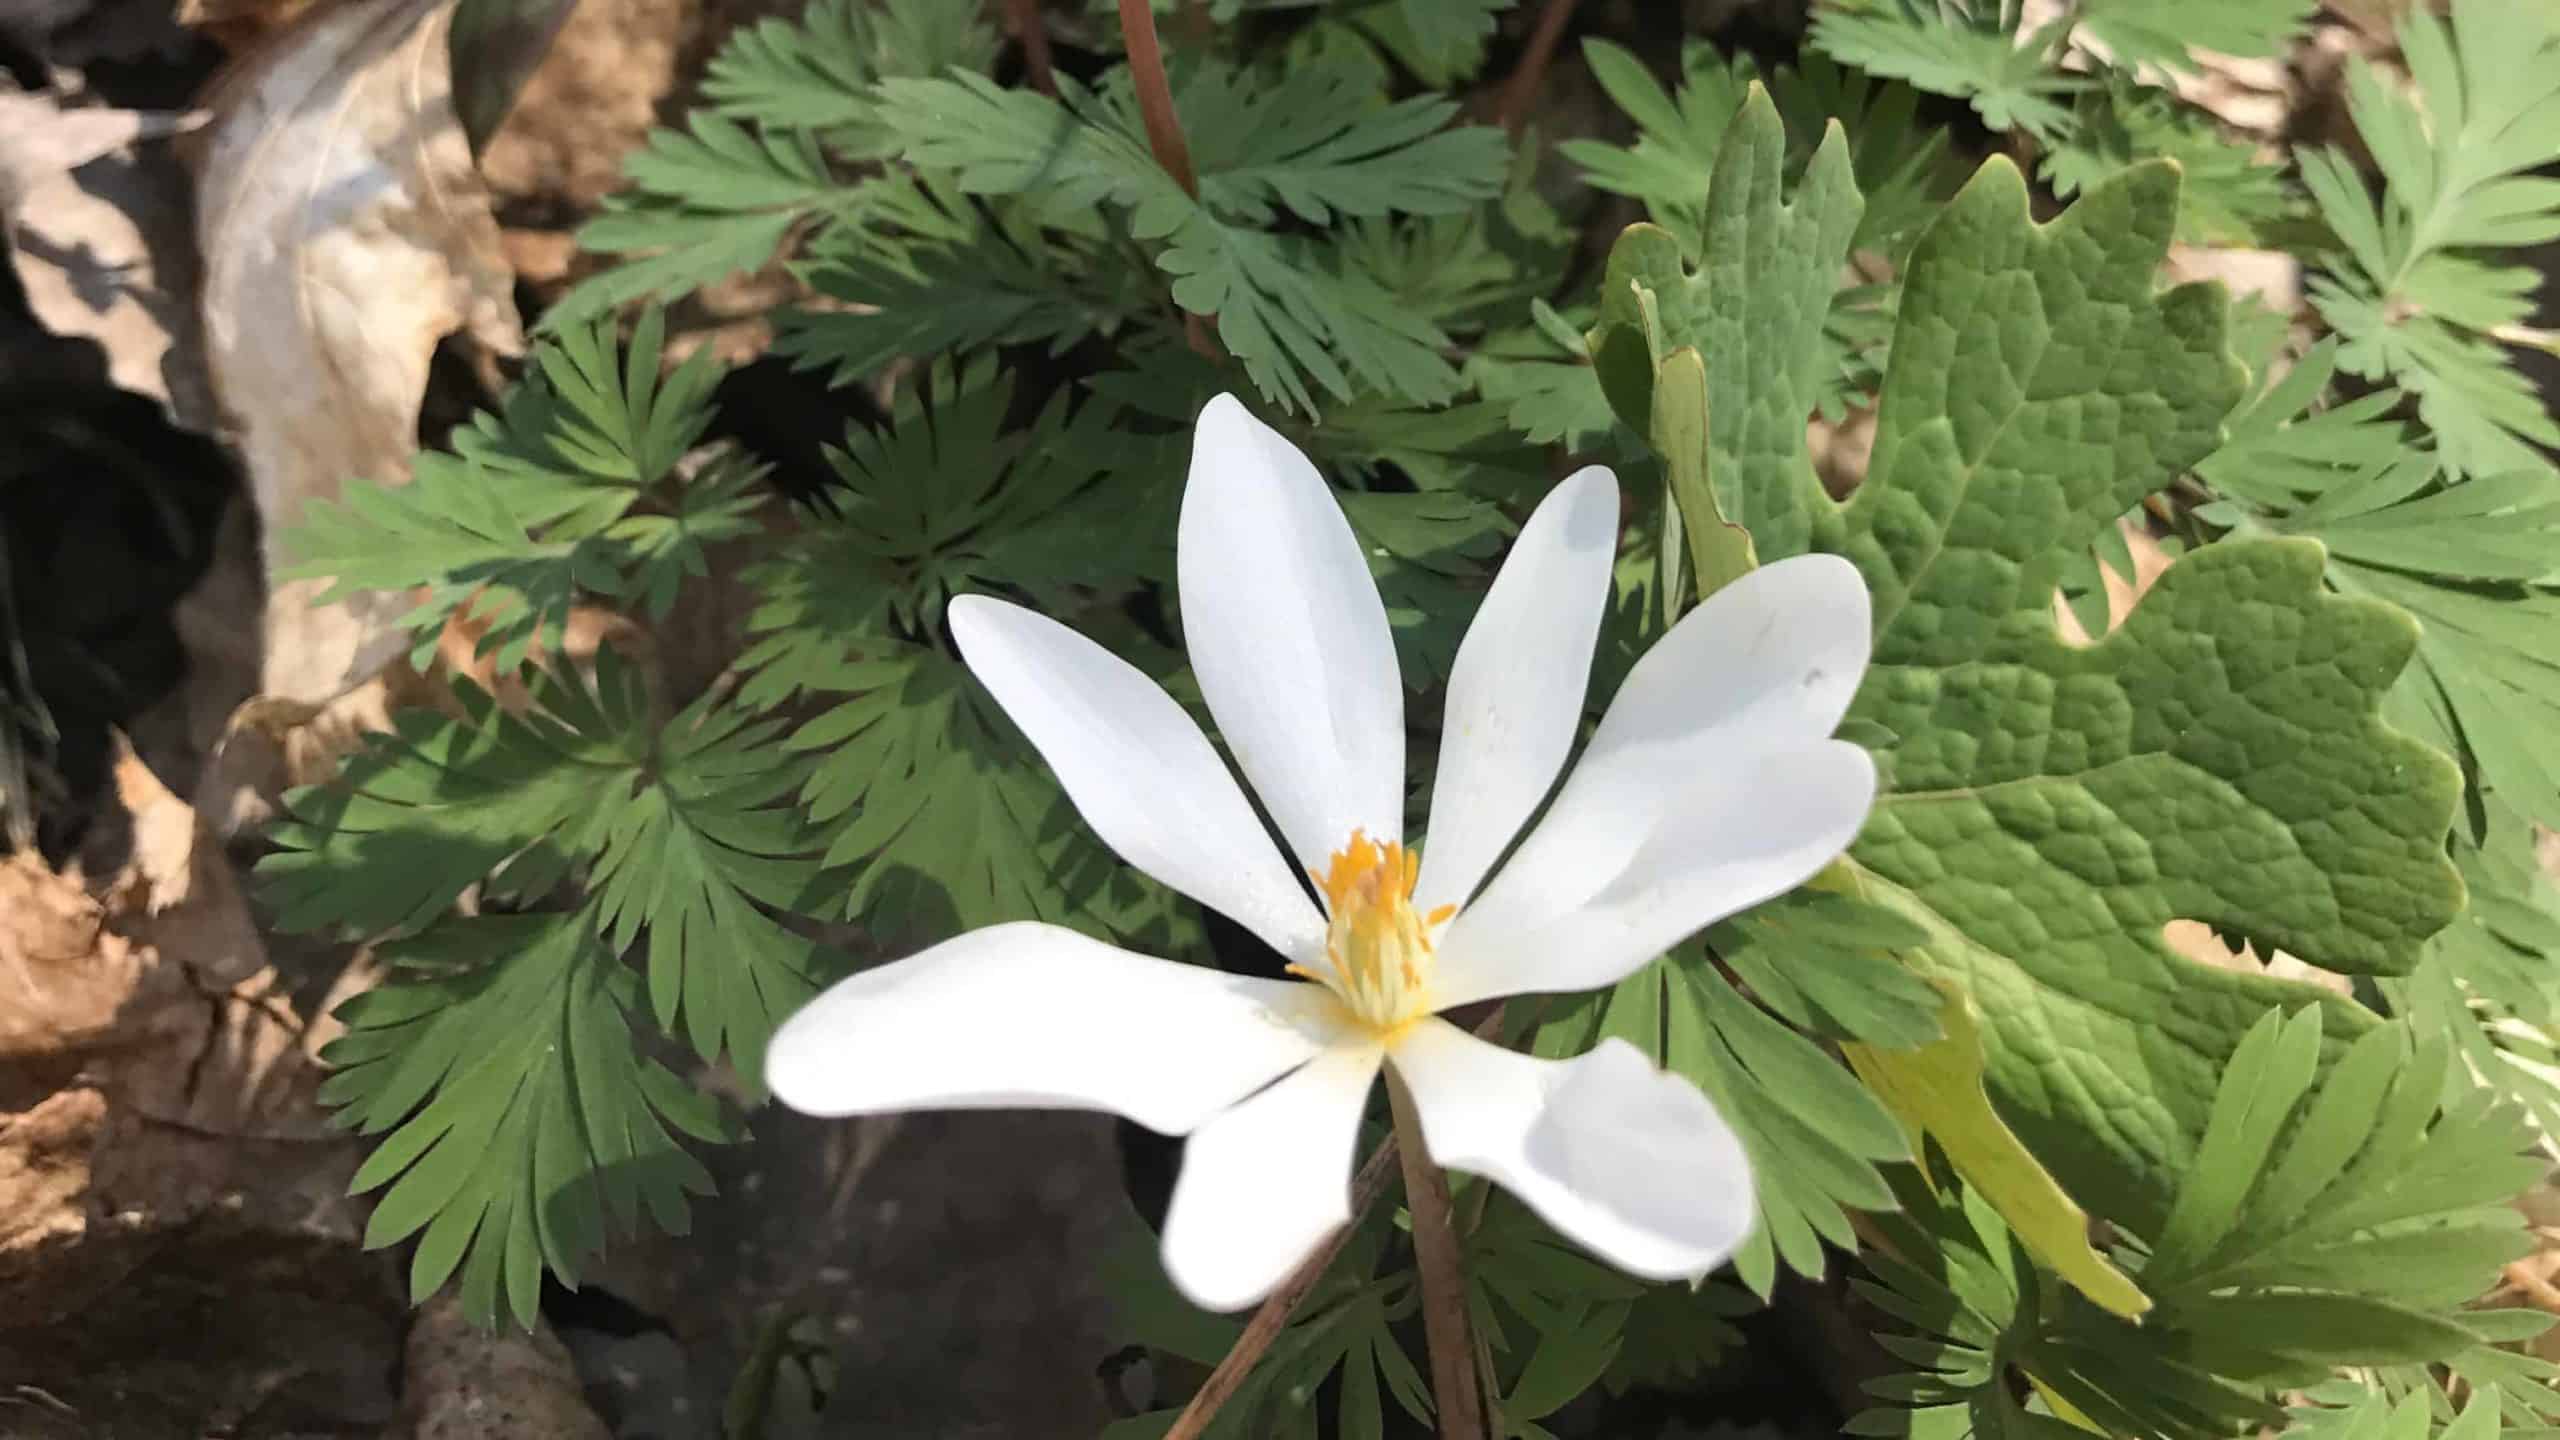 Bloodroot blooms along the Hoosic River in Williamstown.